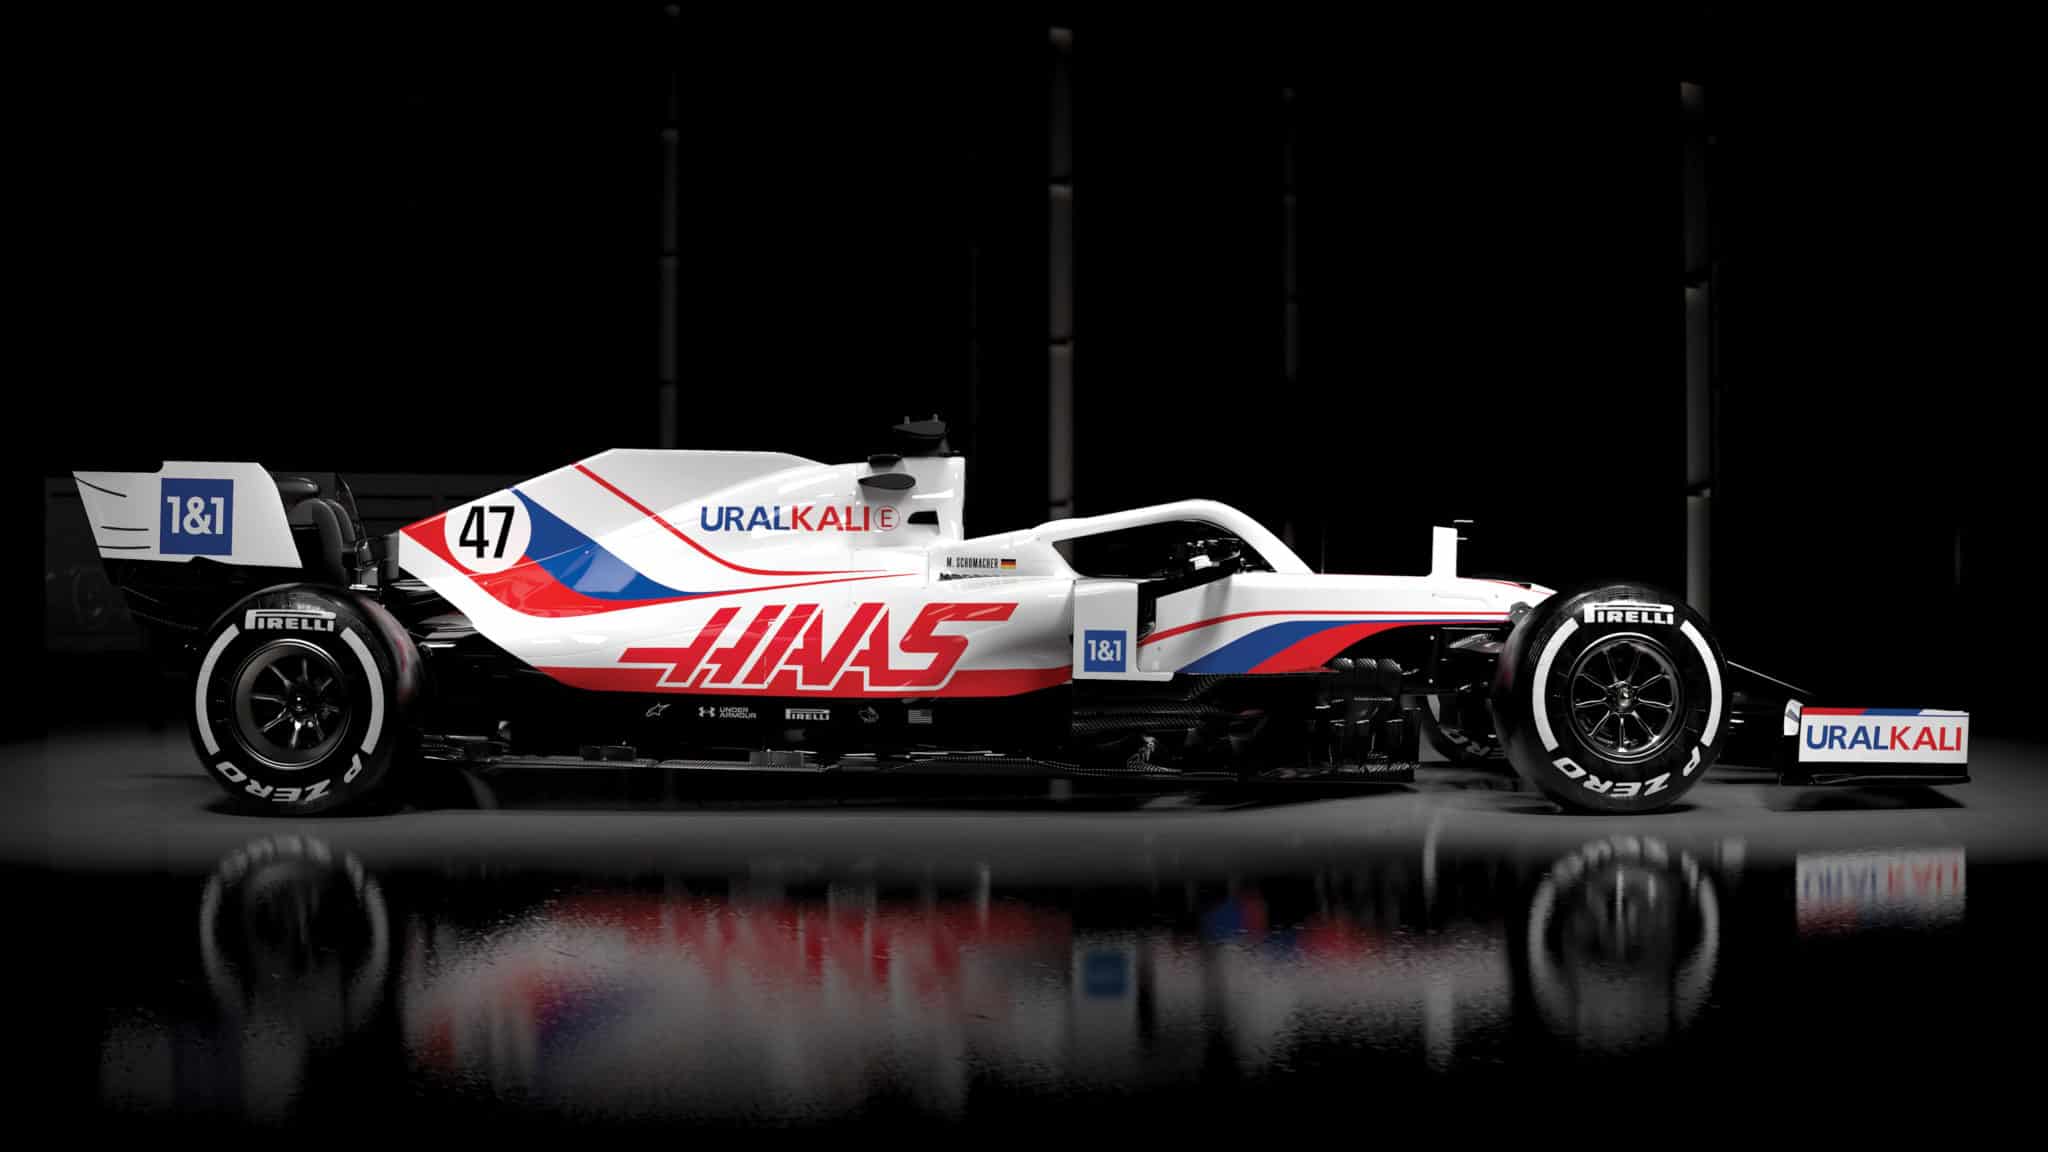 Other Than The Livery And The Driver, Everything Else Remains The Same At Haas